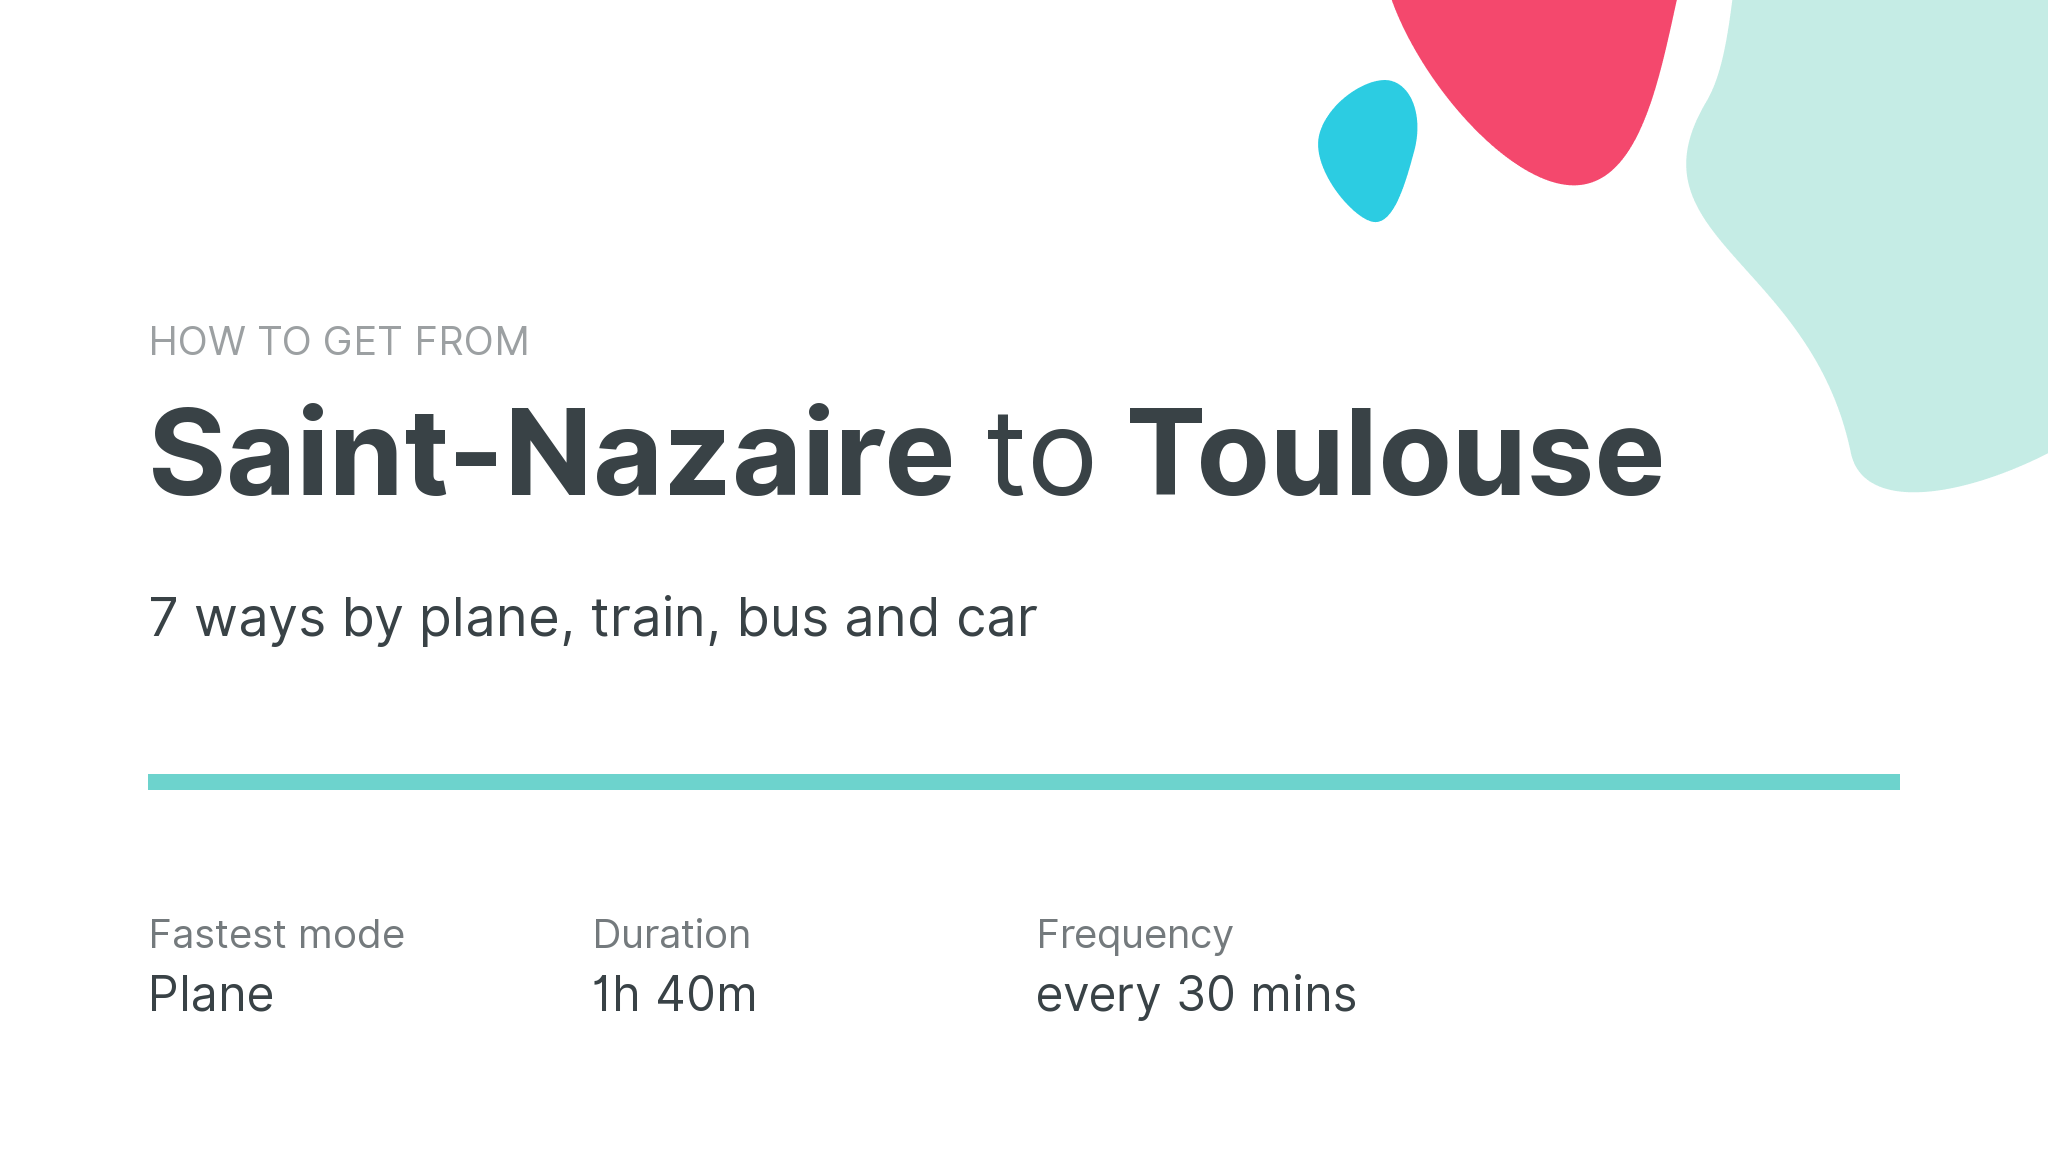 How do I get from Saint-Nazaire to Toulouse